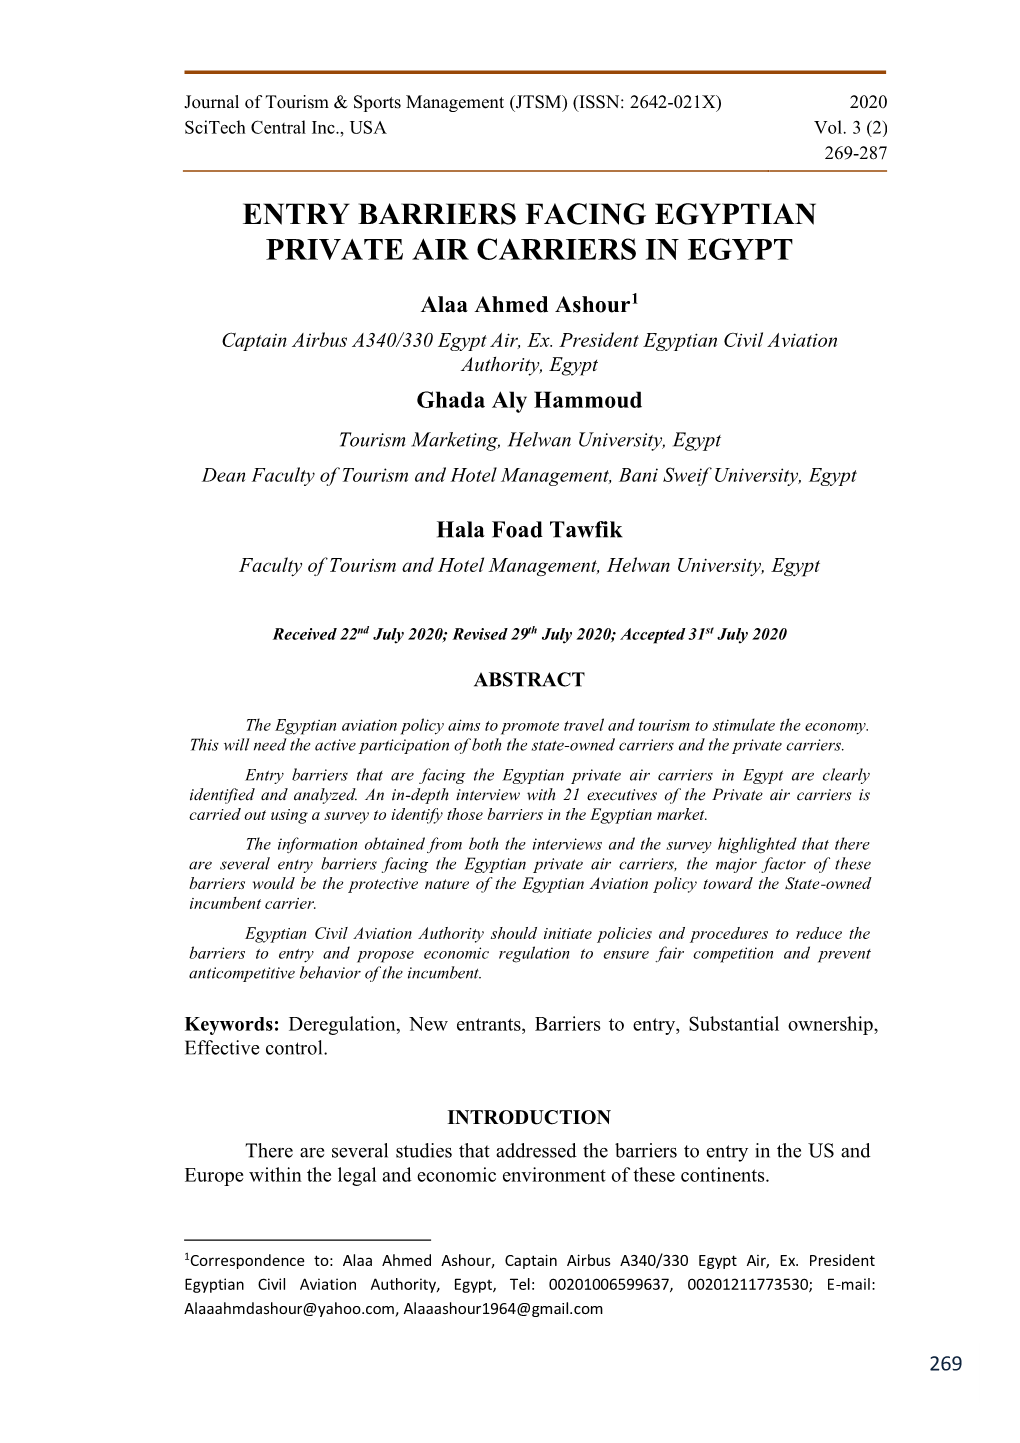 Entry Barriers Facing Egyptian Private Air Carriers in Egypt